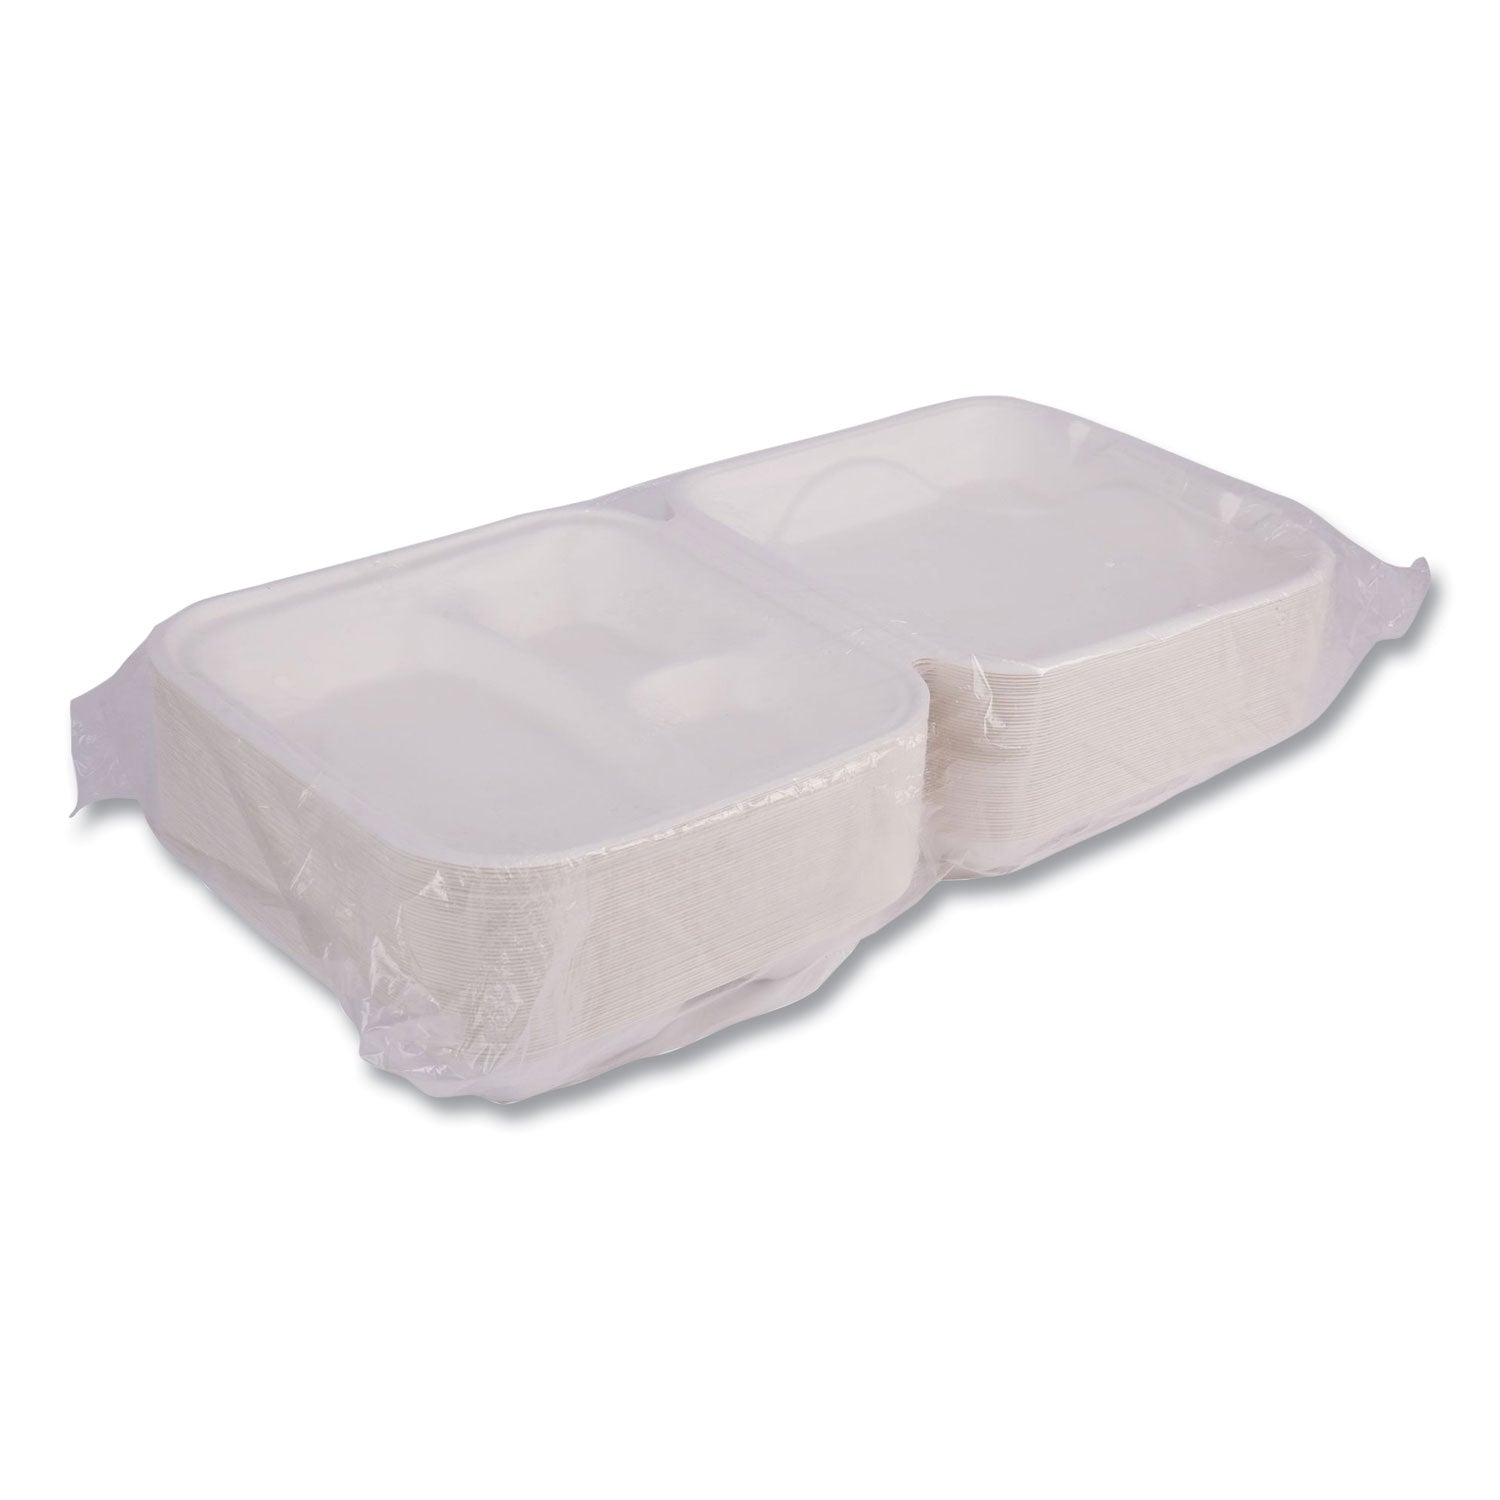 Bagasse Hinged Clamshell Containers, 3-Compartment, 9 x 9 x 3, White, Sugarcane, 50/Pack, 4 Packs/Carton - 